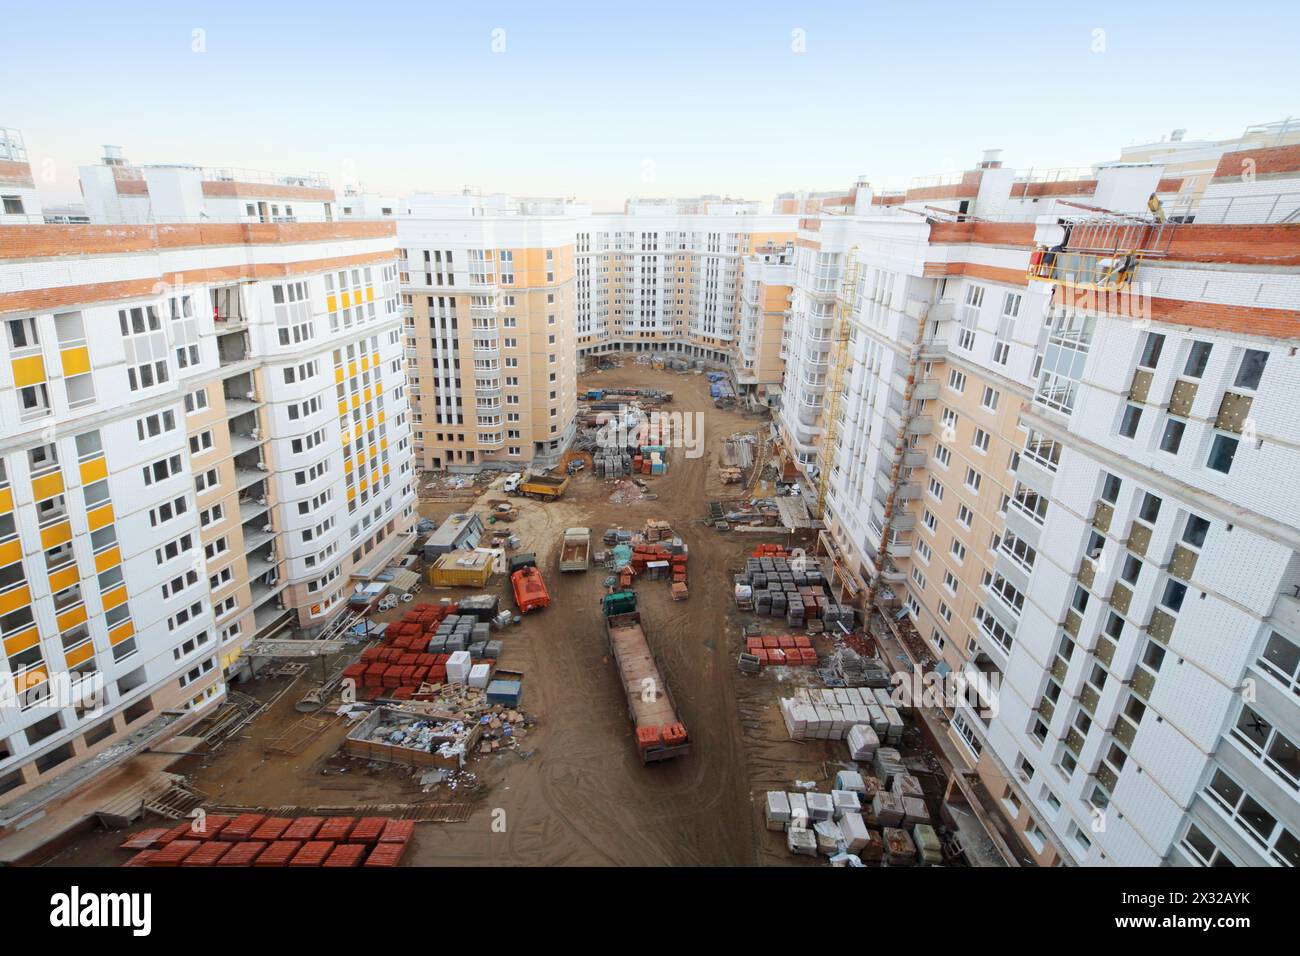 Multi-storey residential buildings under construction, trucks, bricks and other building materials at day. Stock Photo